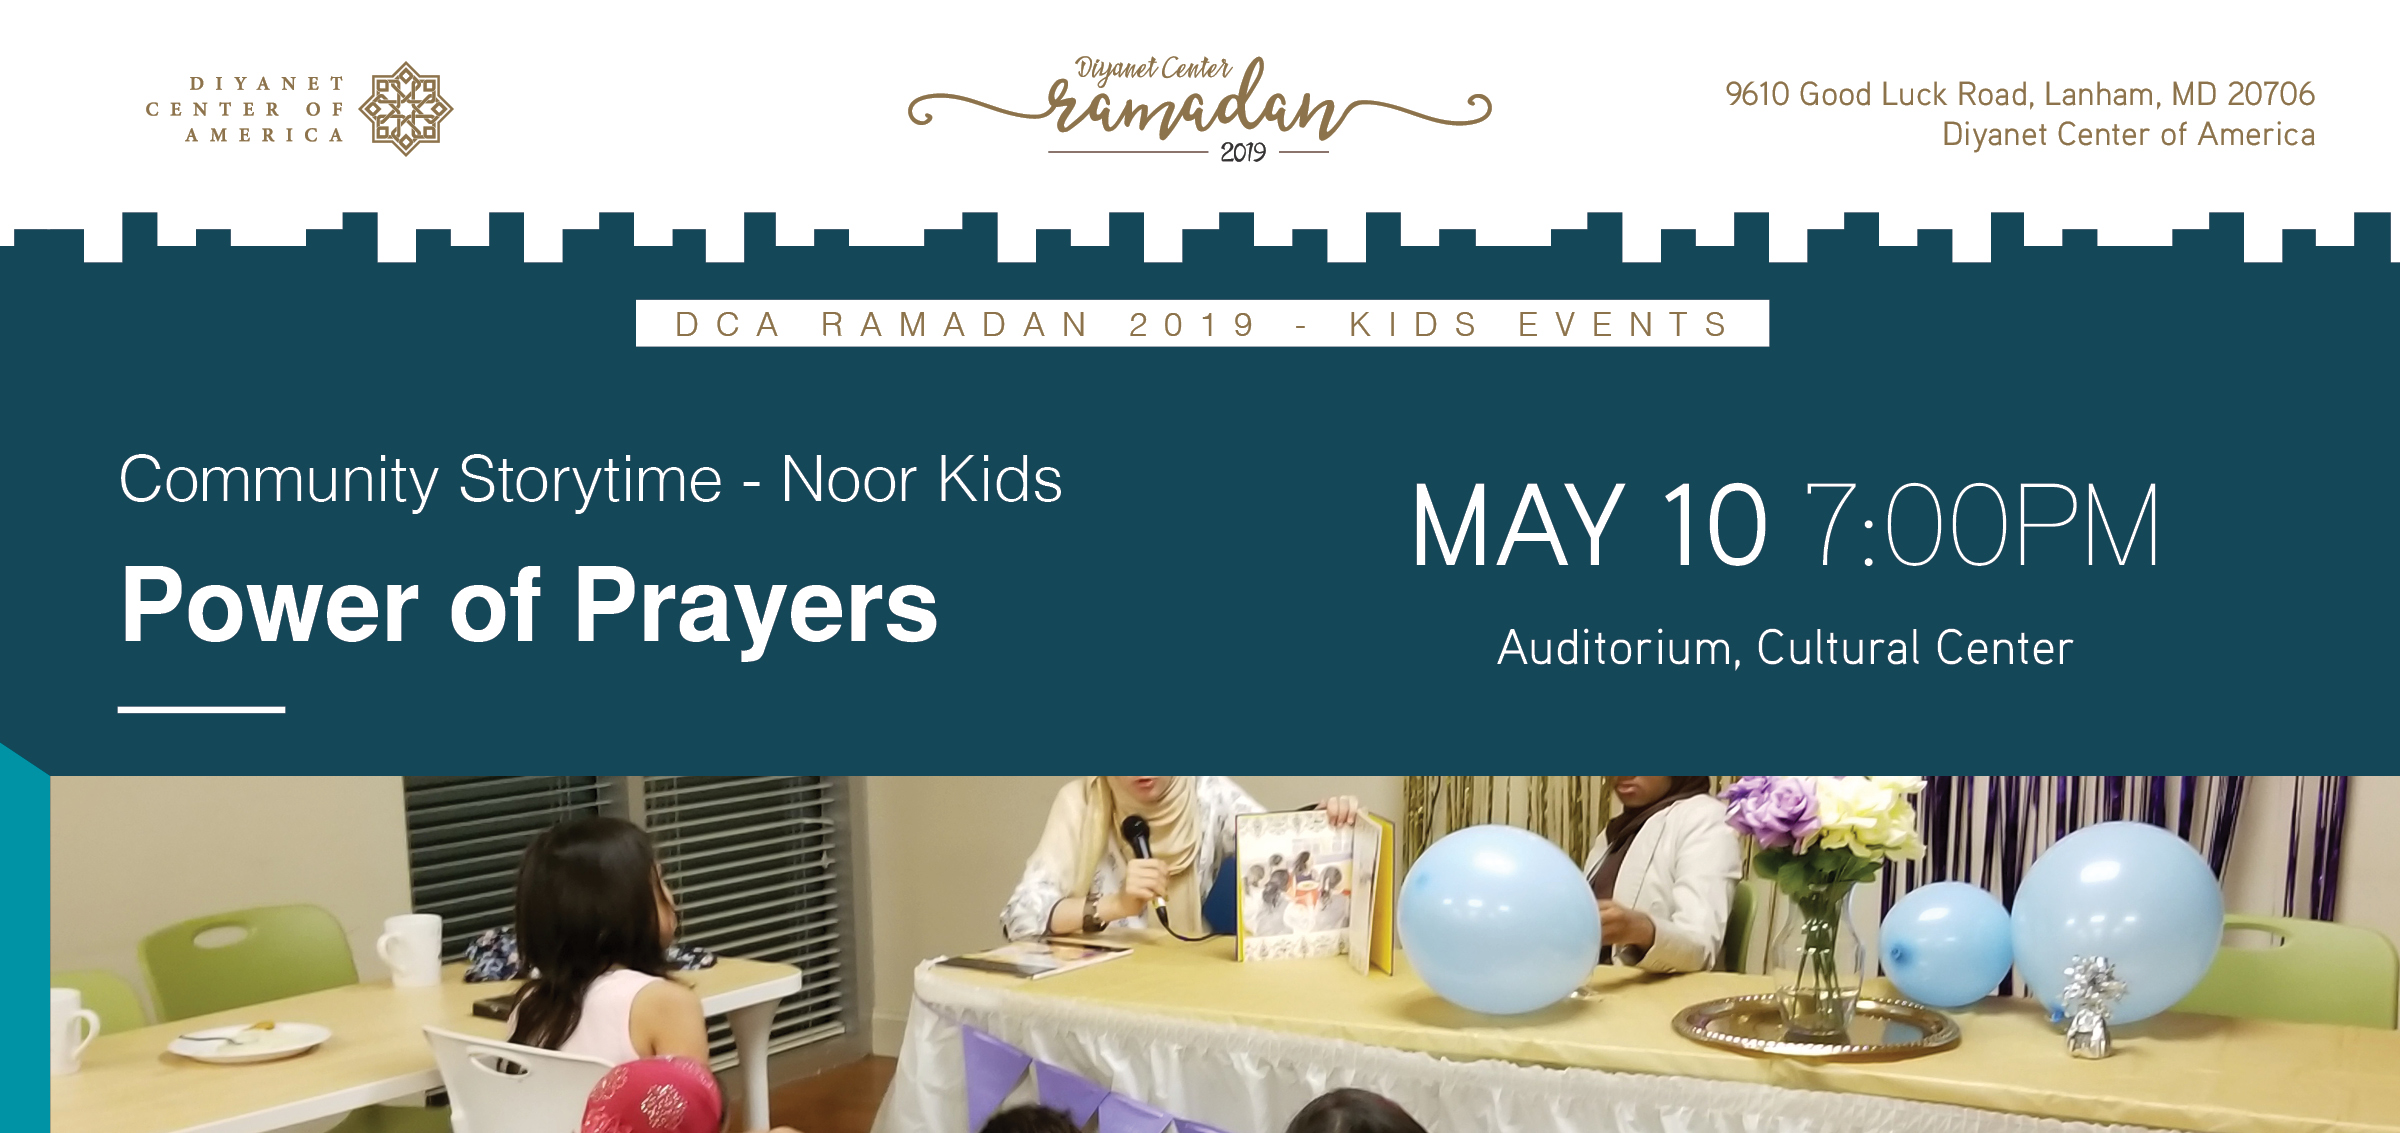 'Power of Prayers' Community Story Time with Noor Kids